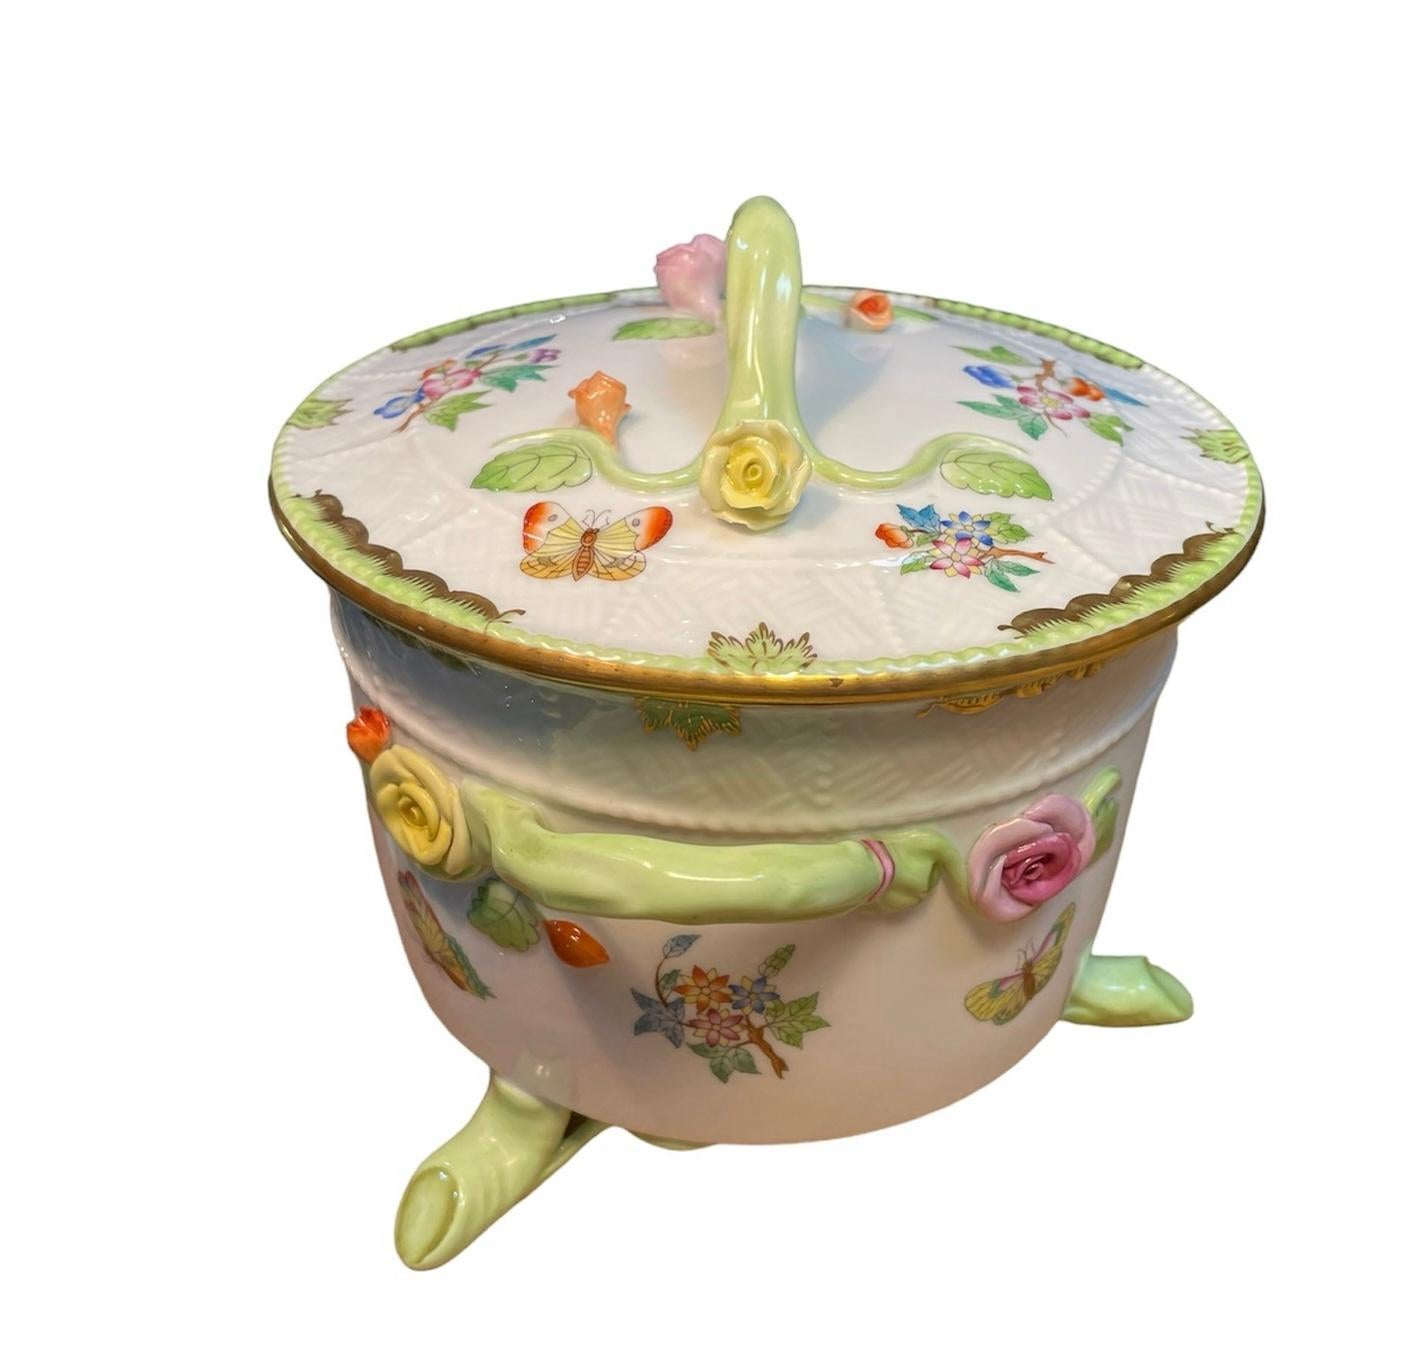 Herend Porcelain Queen Victoria Pattern Lidded Biscuit Box In Good Condition For Sale In Guaynabo, PR